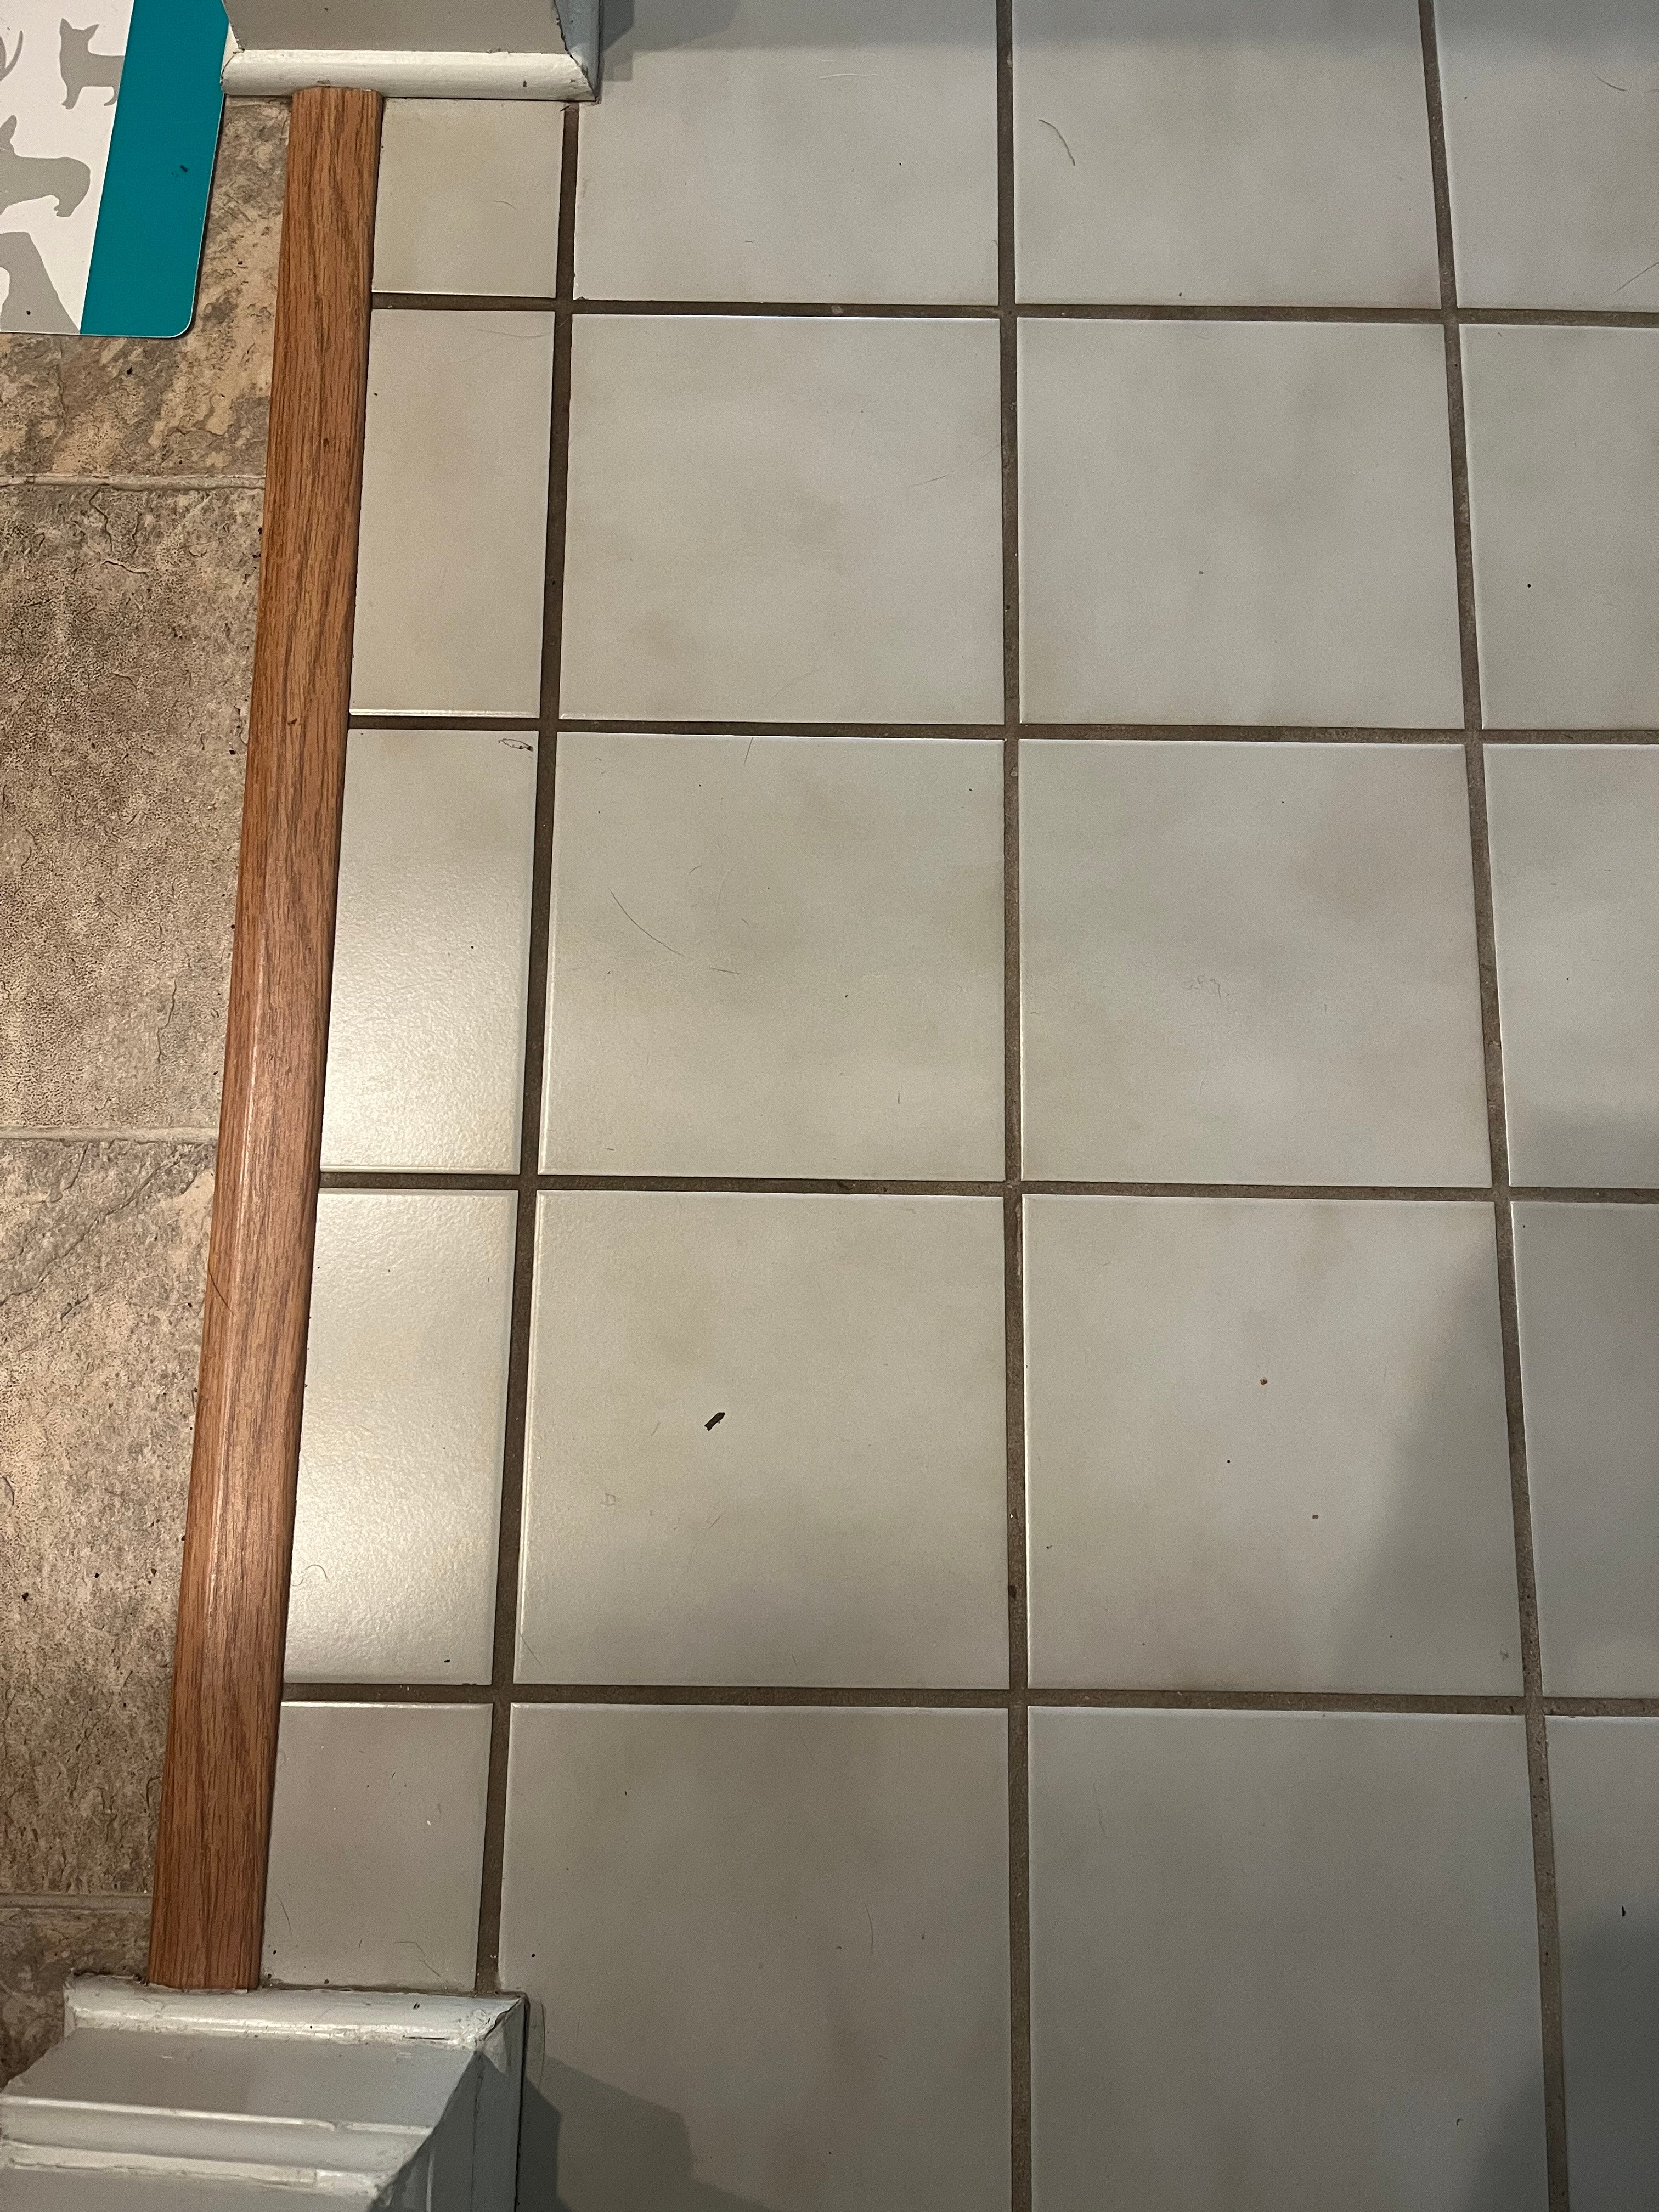 20 Year old dirty tile